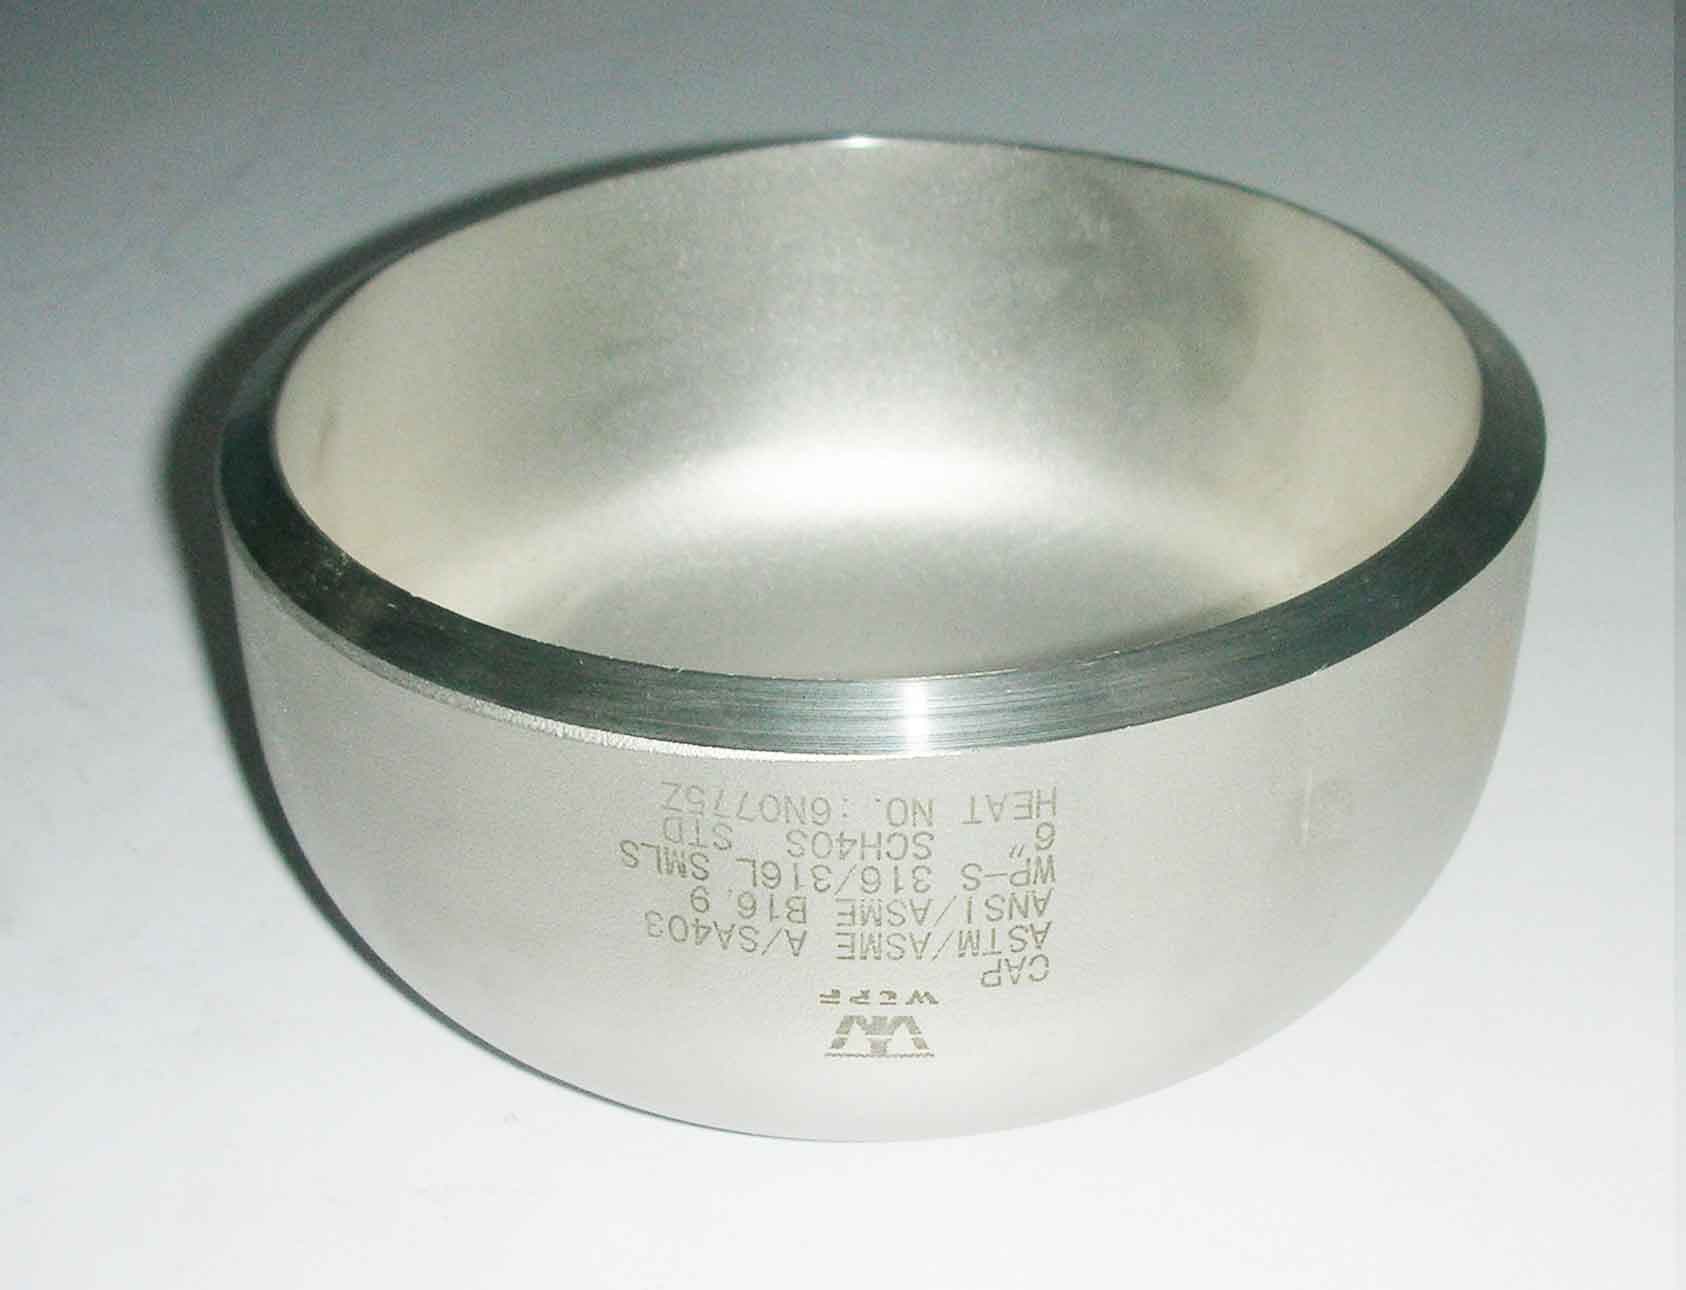 Stainless steel cap   355_6_8_0   DIN2617  SS304